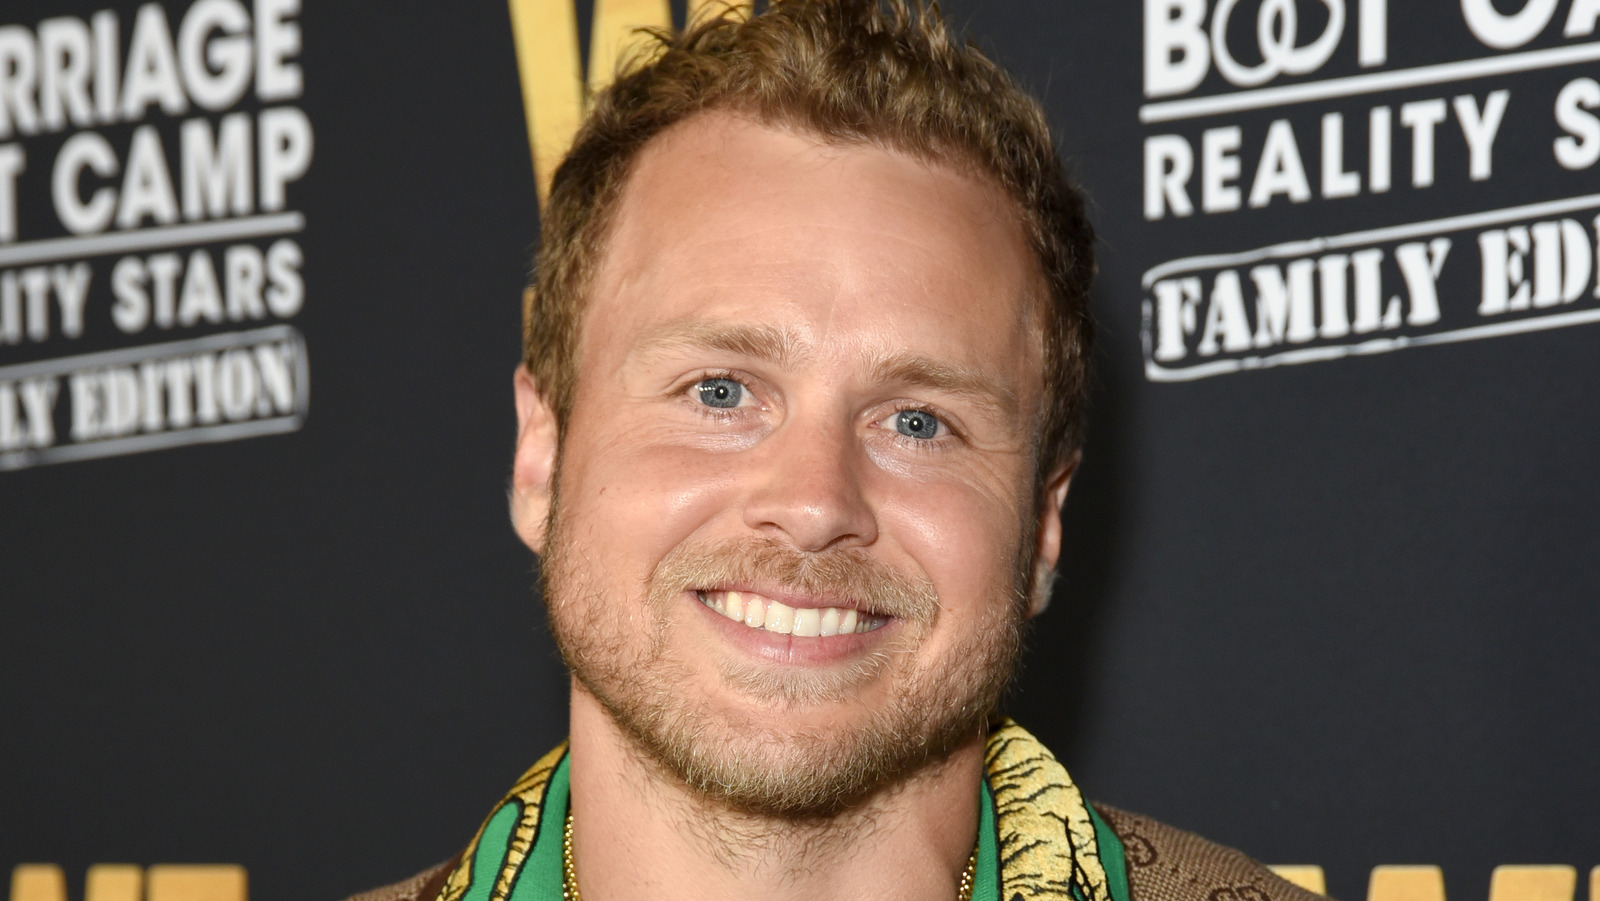 Spencer Pratt Says He Has Intel Harry And Meghan Are At Odds Over Their ...